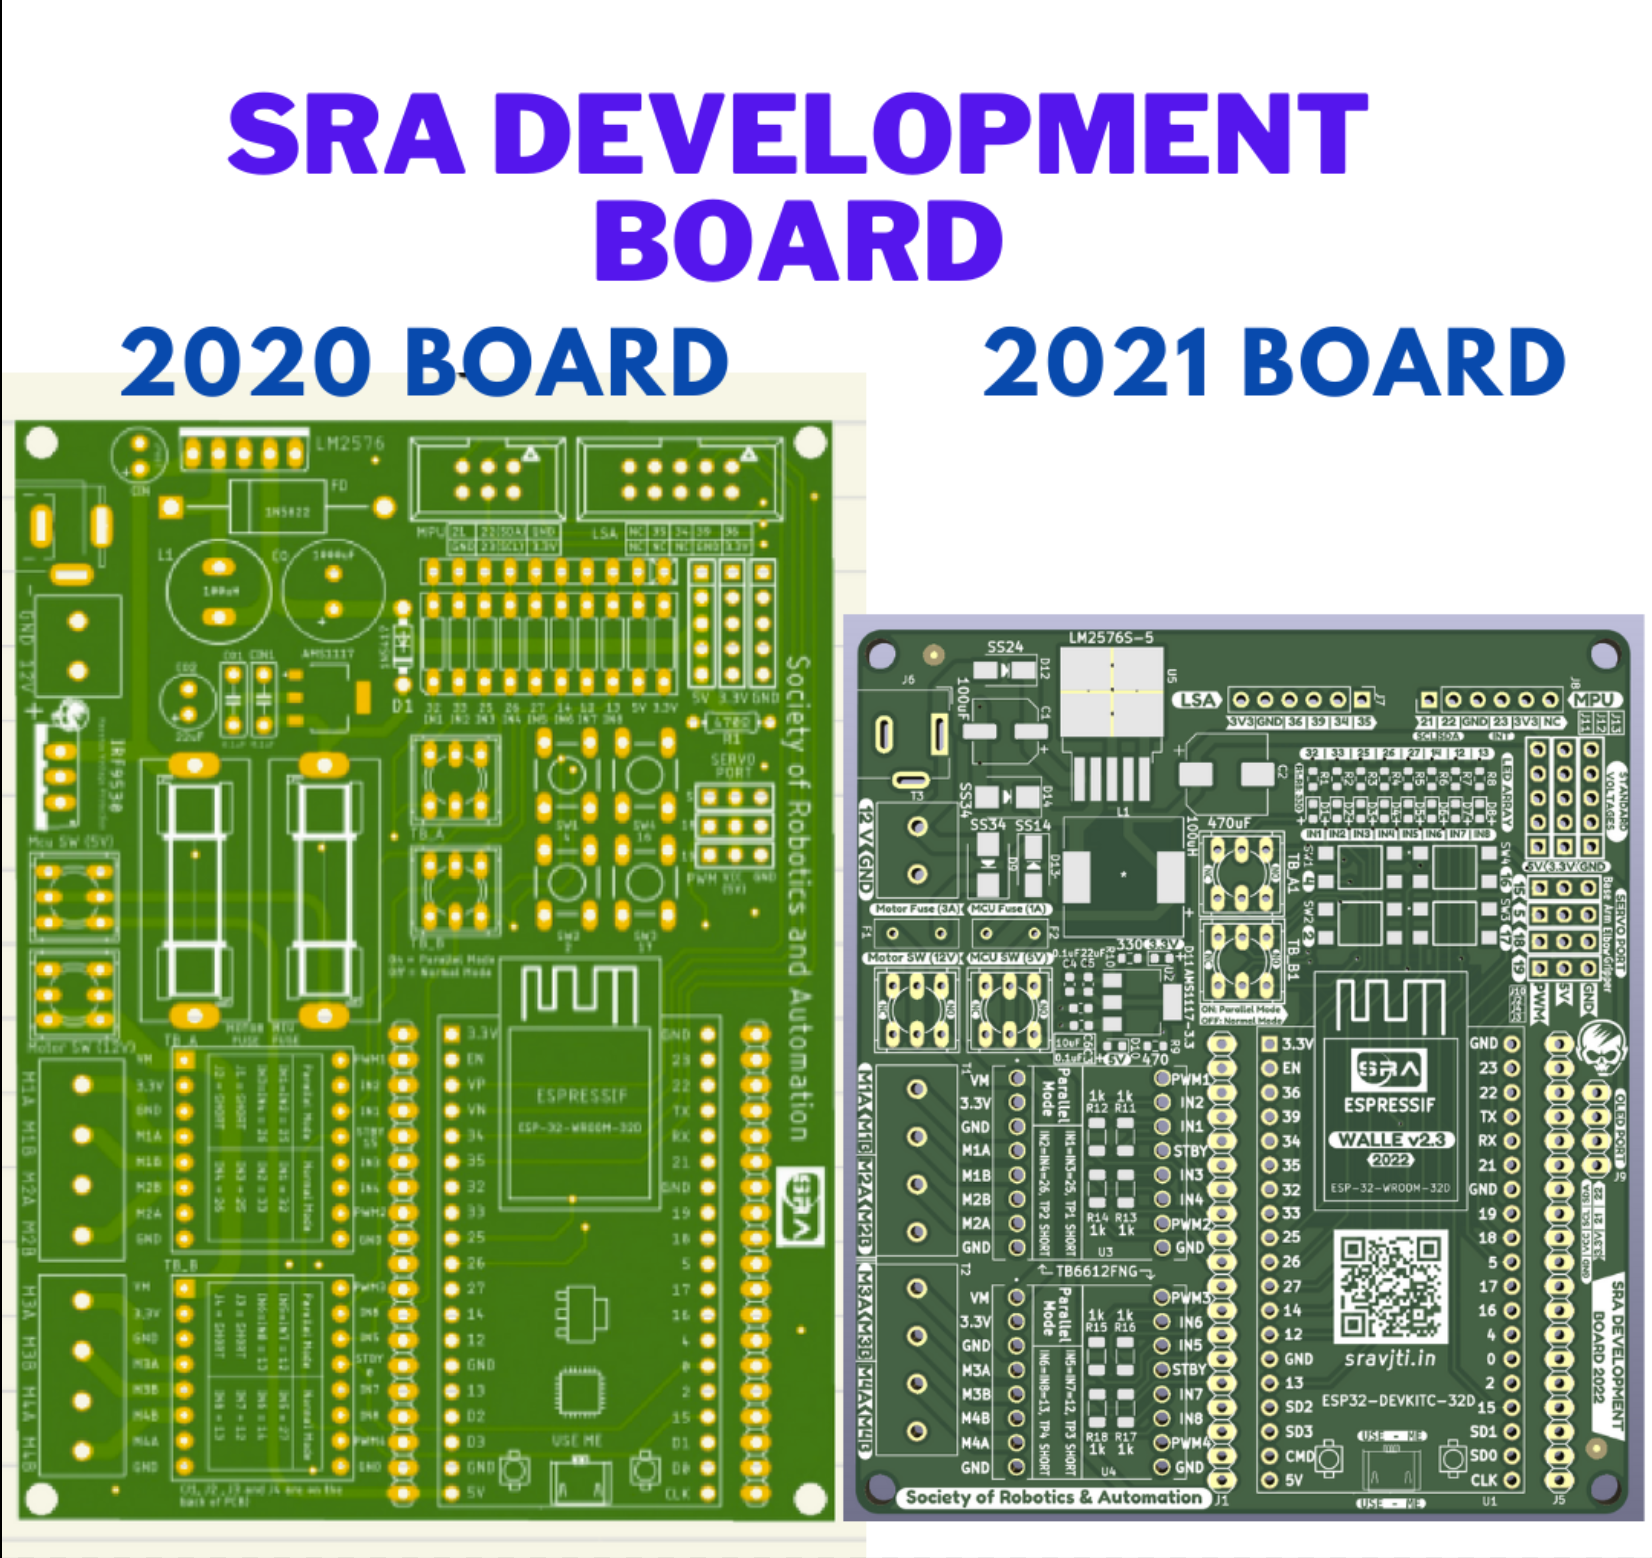 boards_compare.png